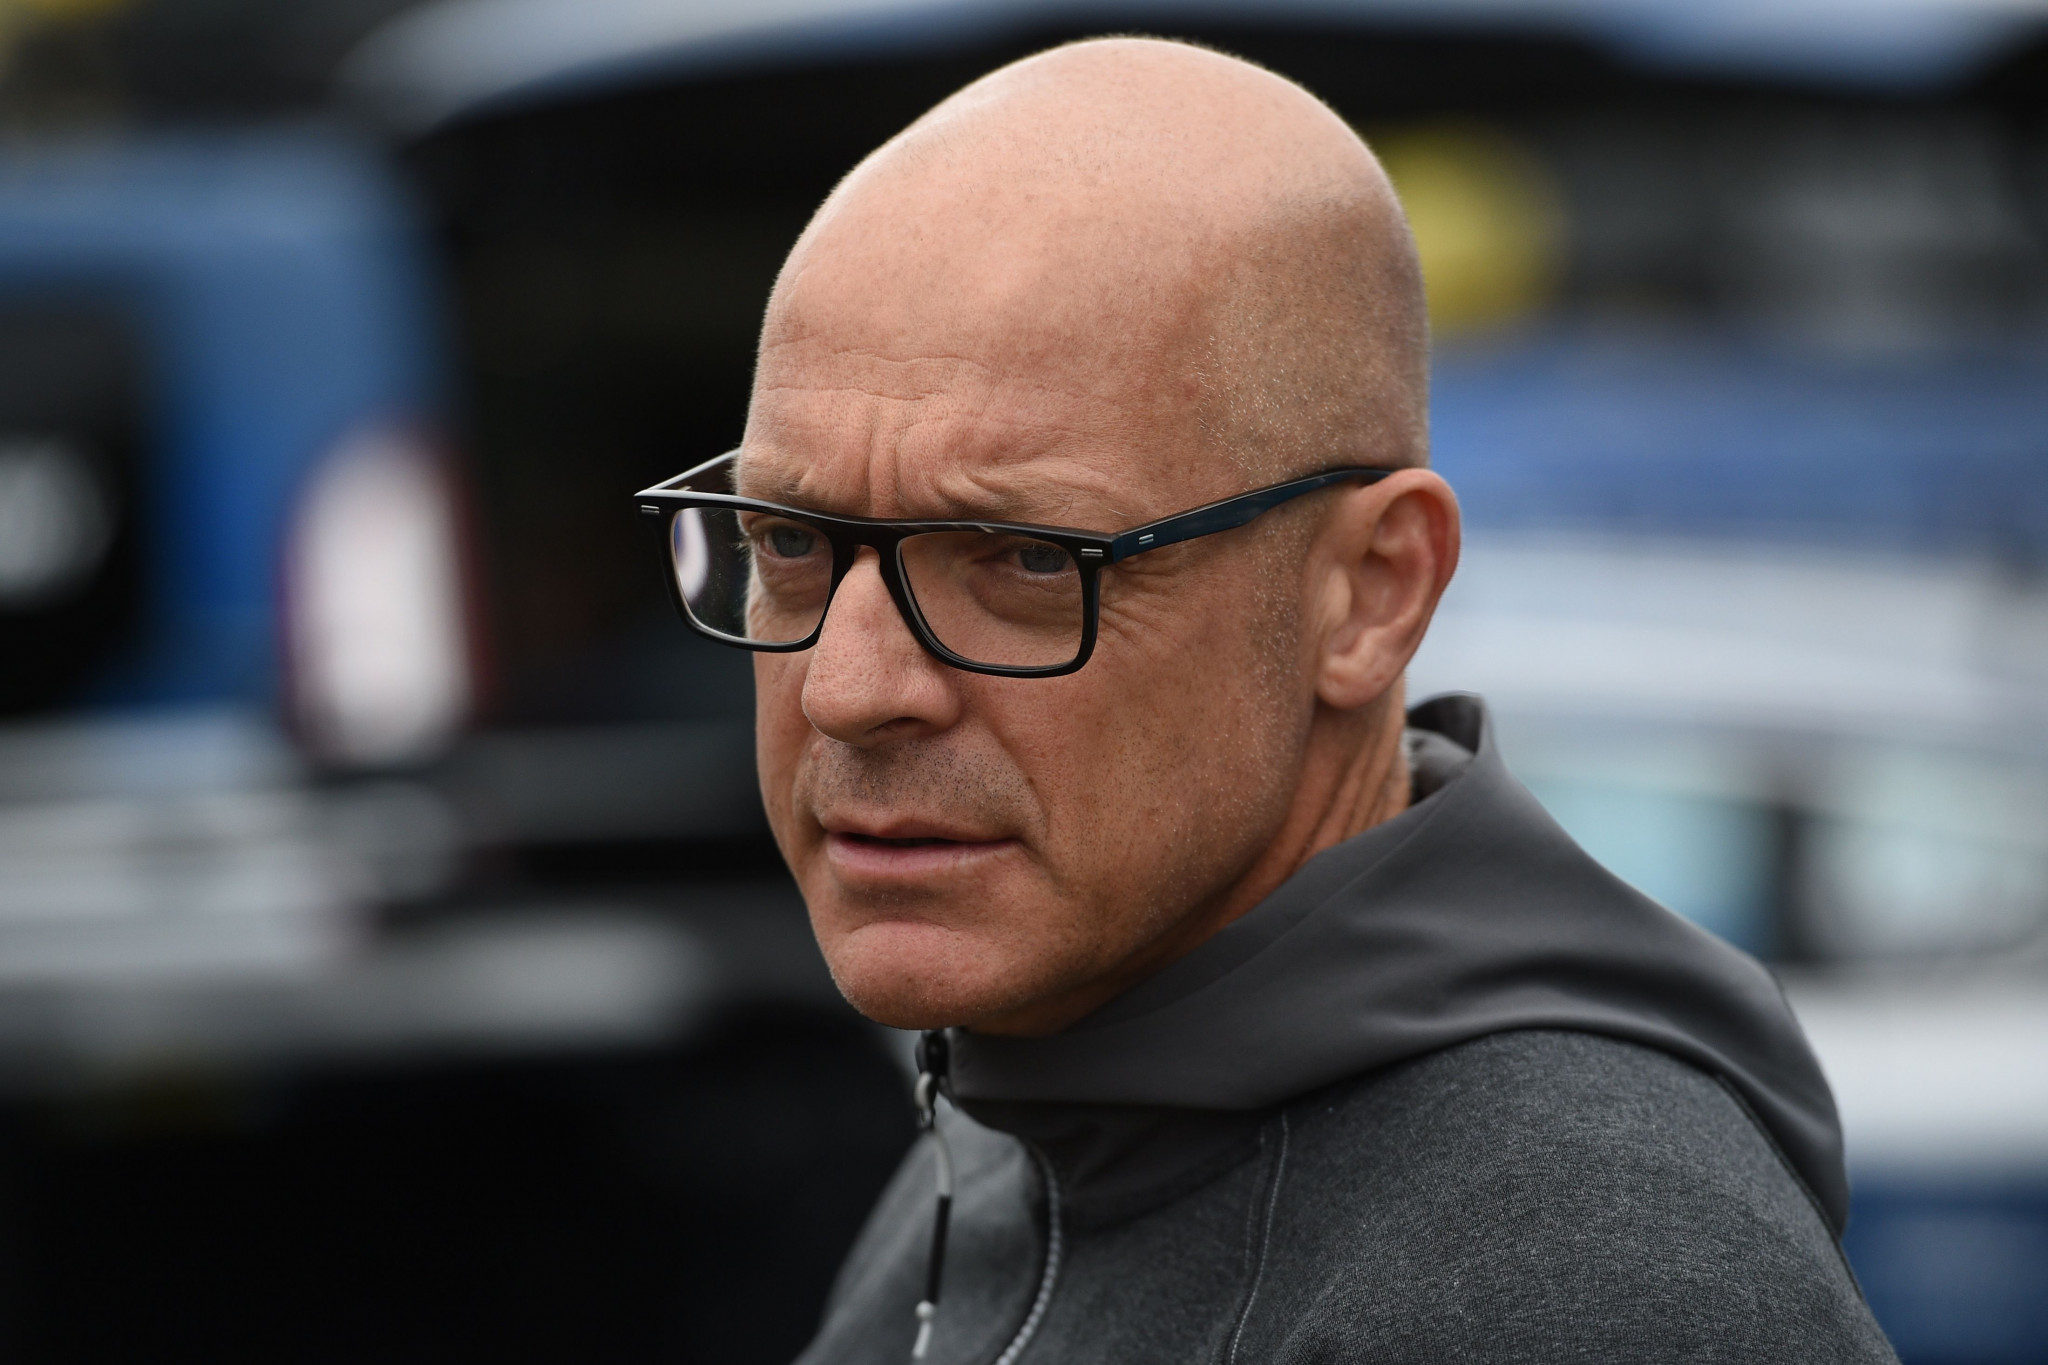 Sir Dave Brailsford welcomed the team's future being secured ©Getty Images